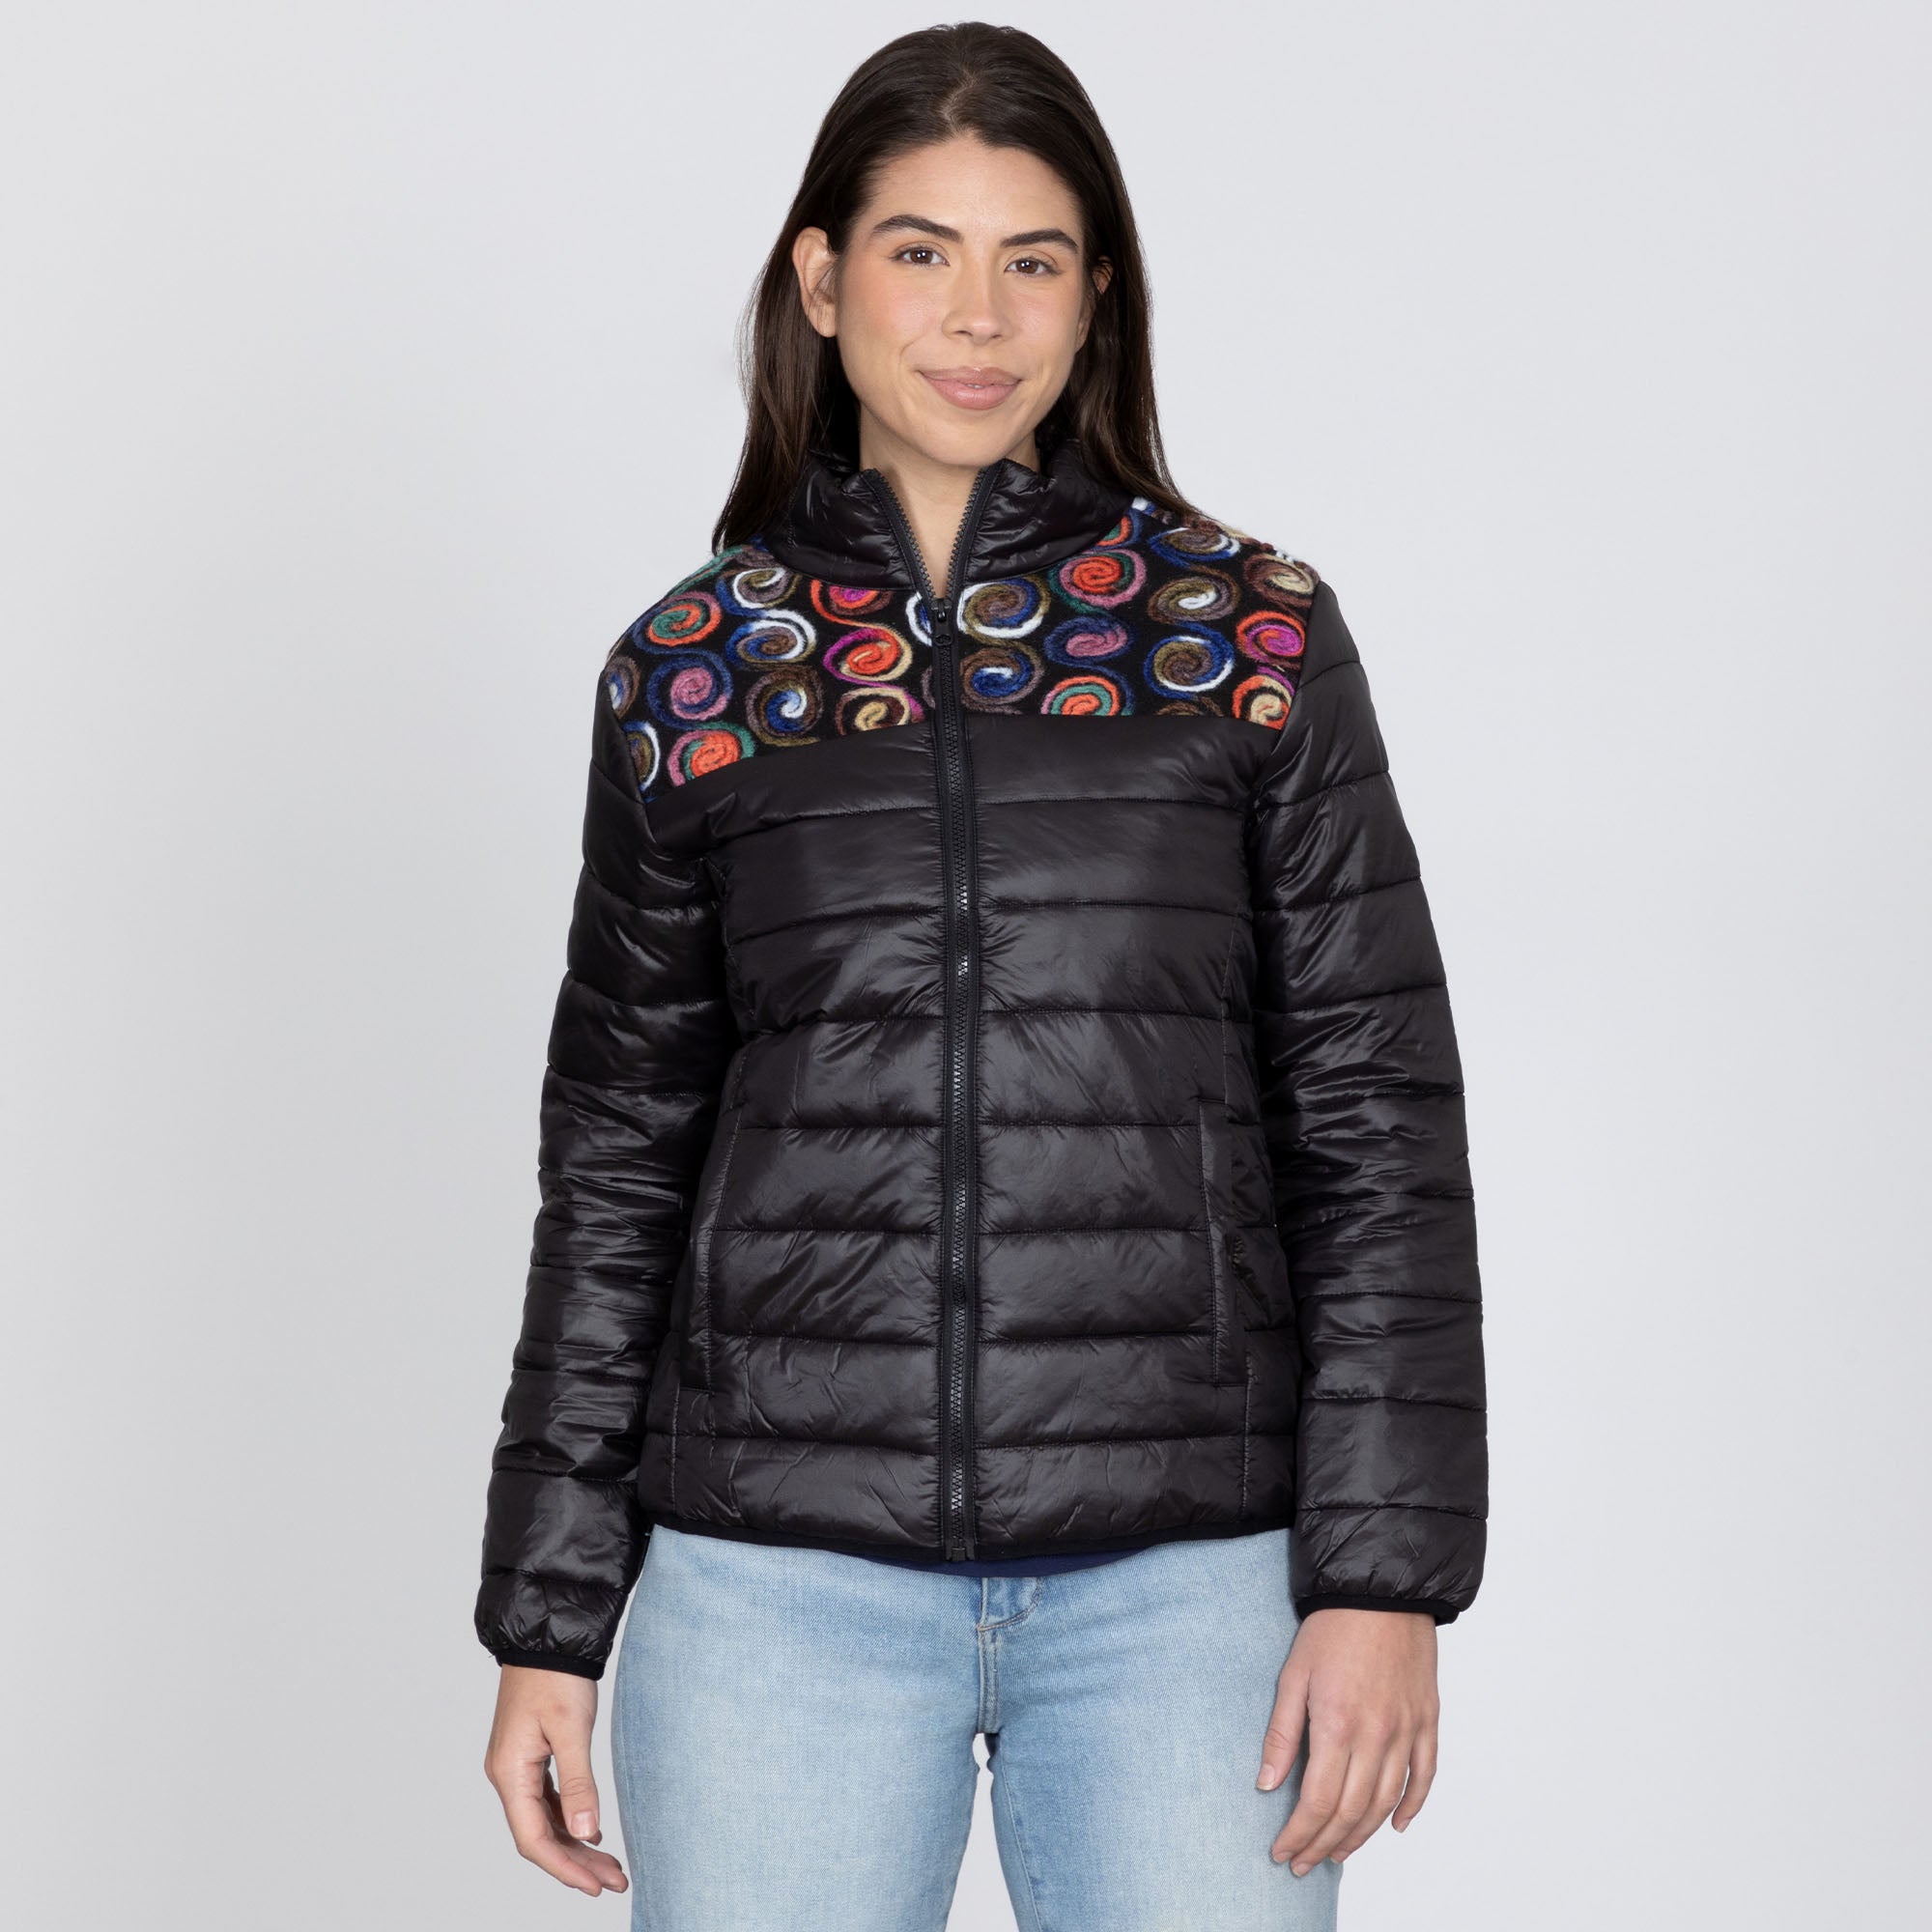 Mixed Fabric Embroidery Insulated Jacket - 1X